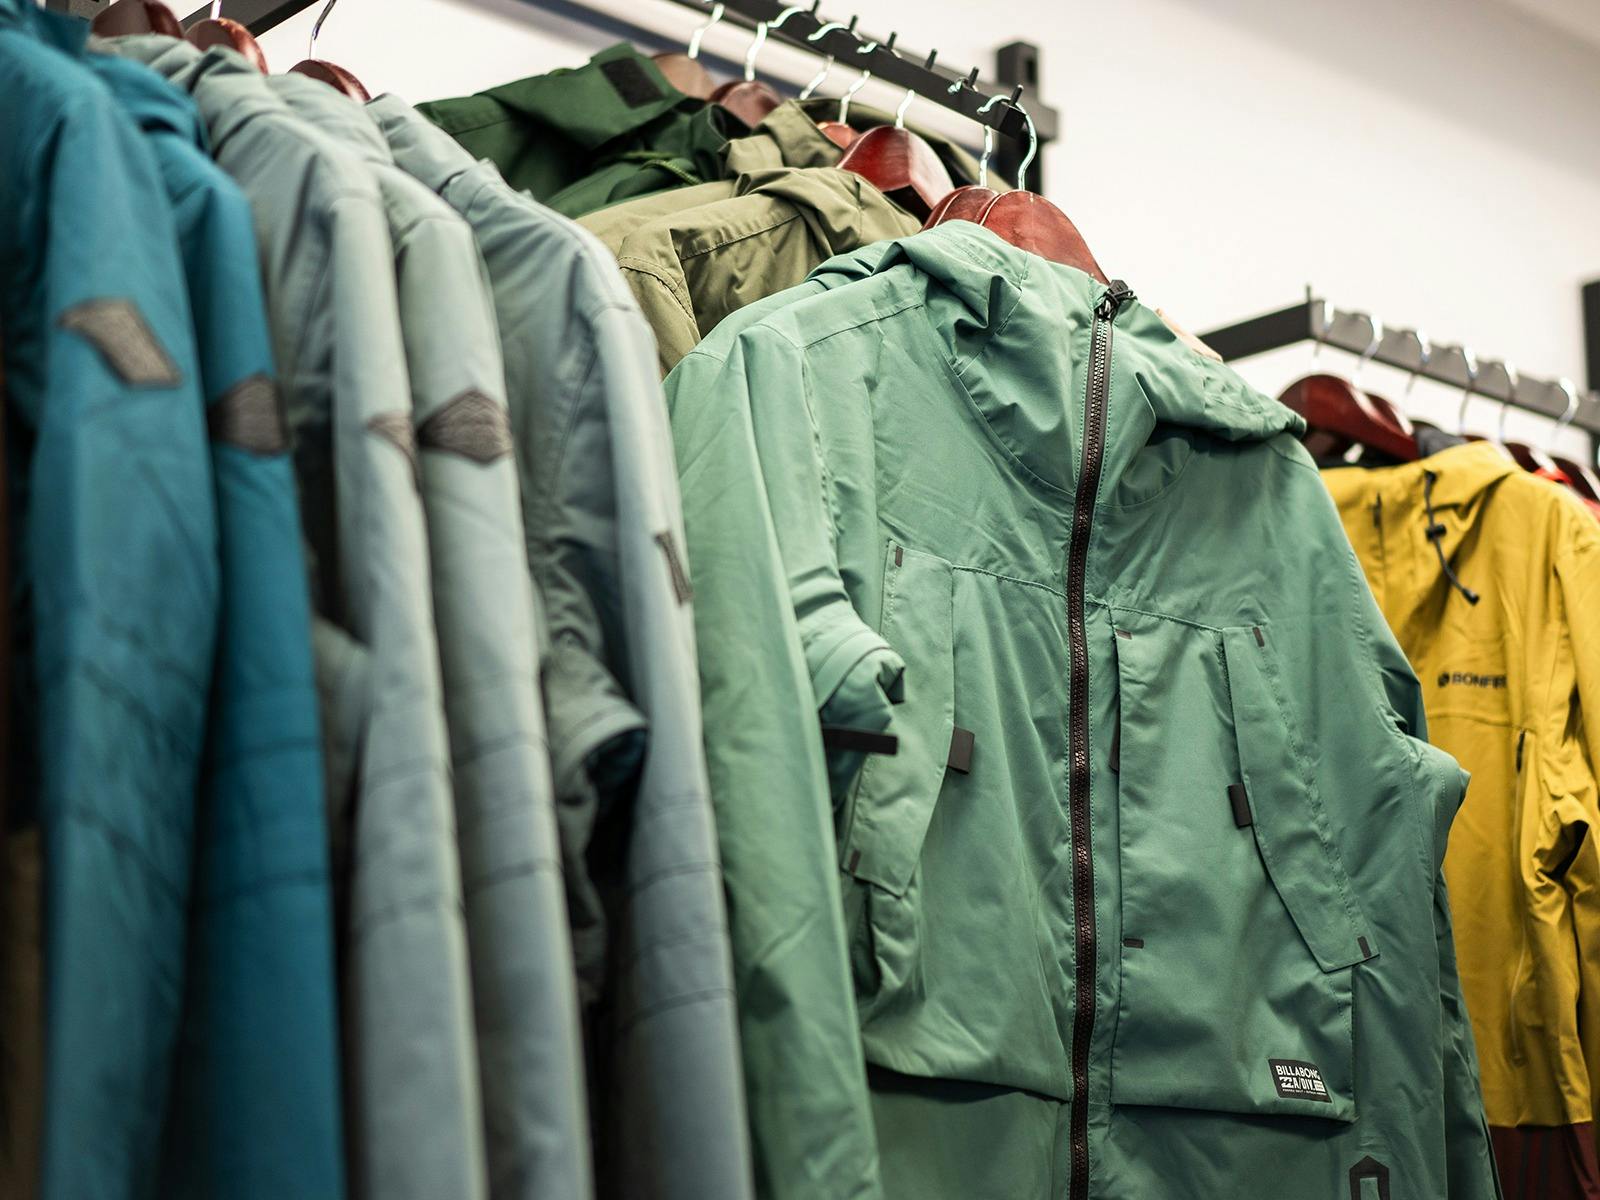 snow jackets hanging on a rack